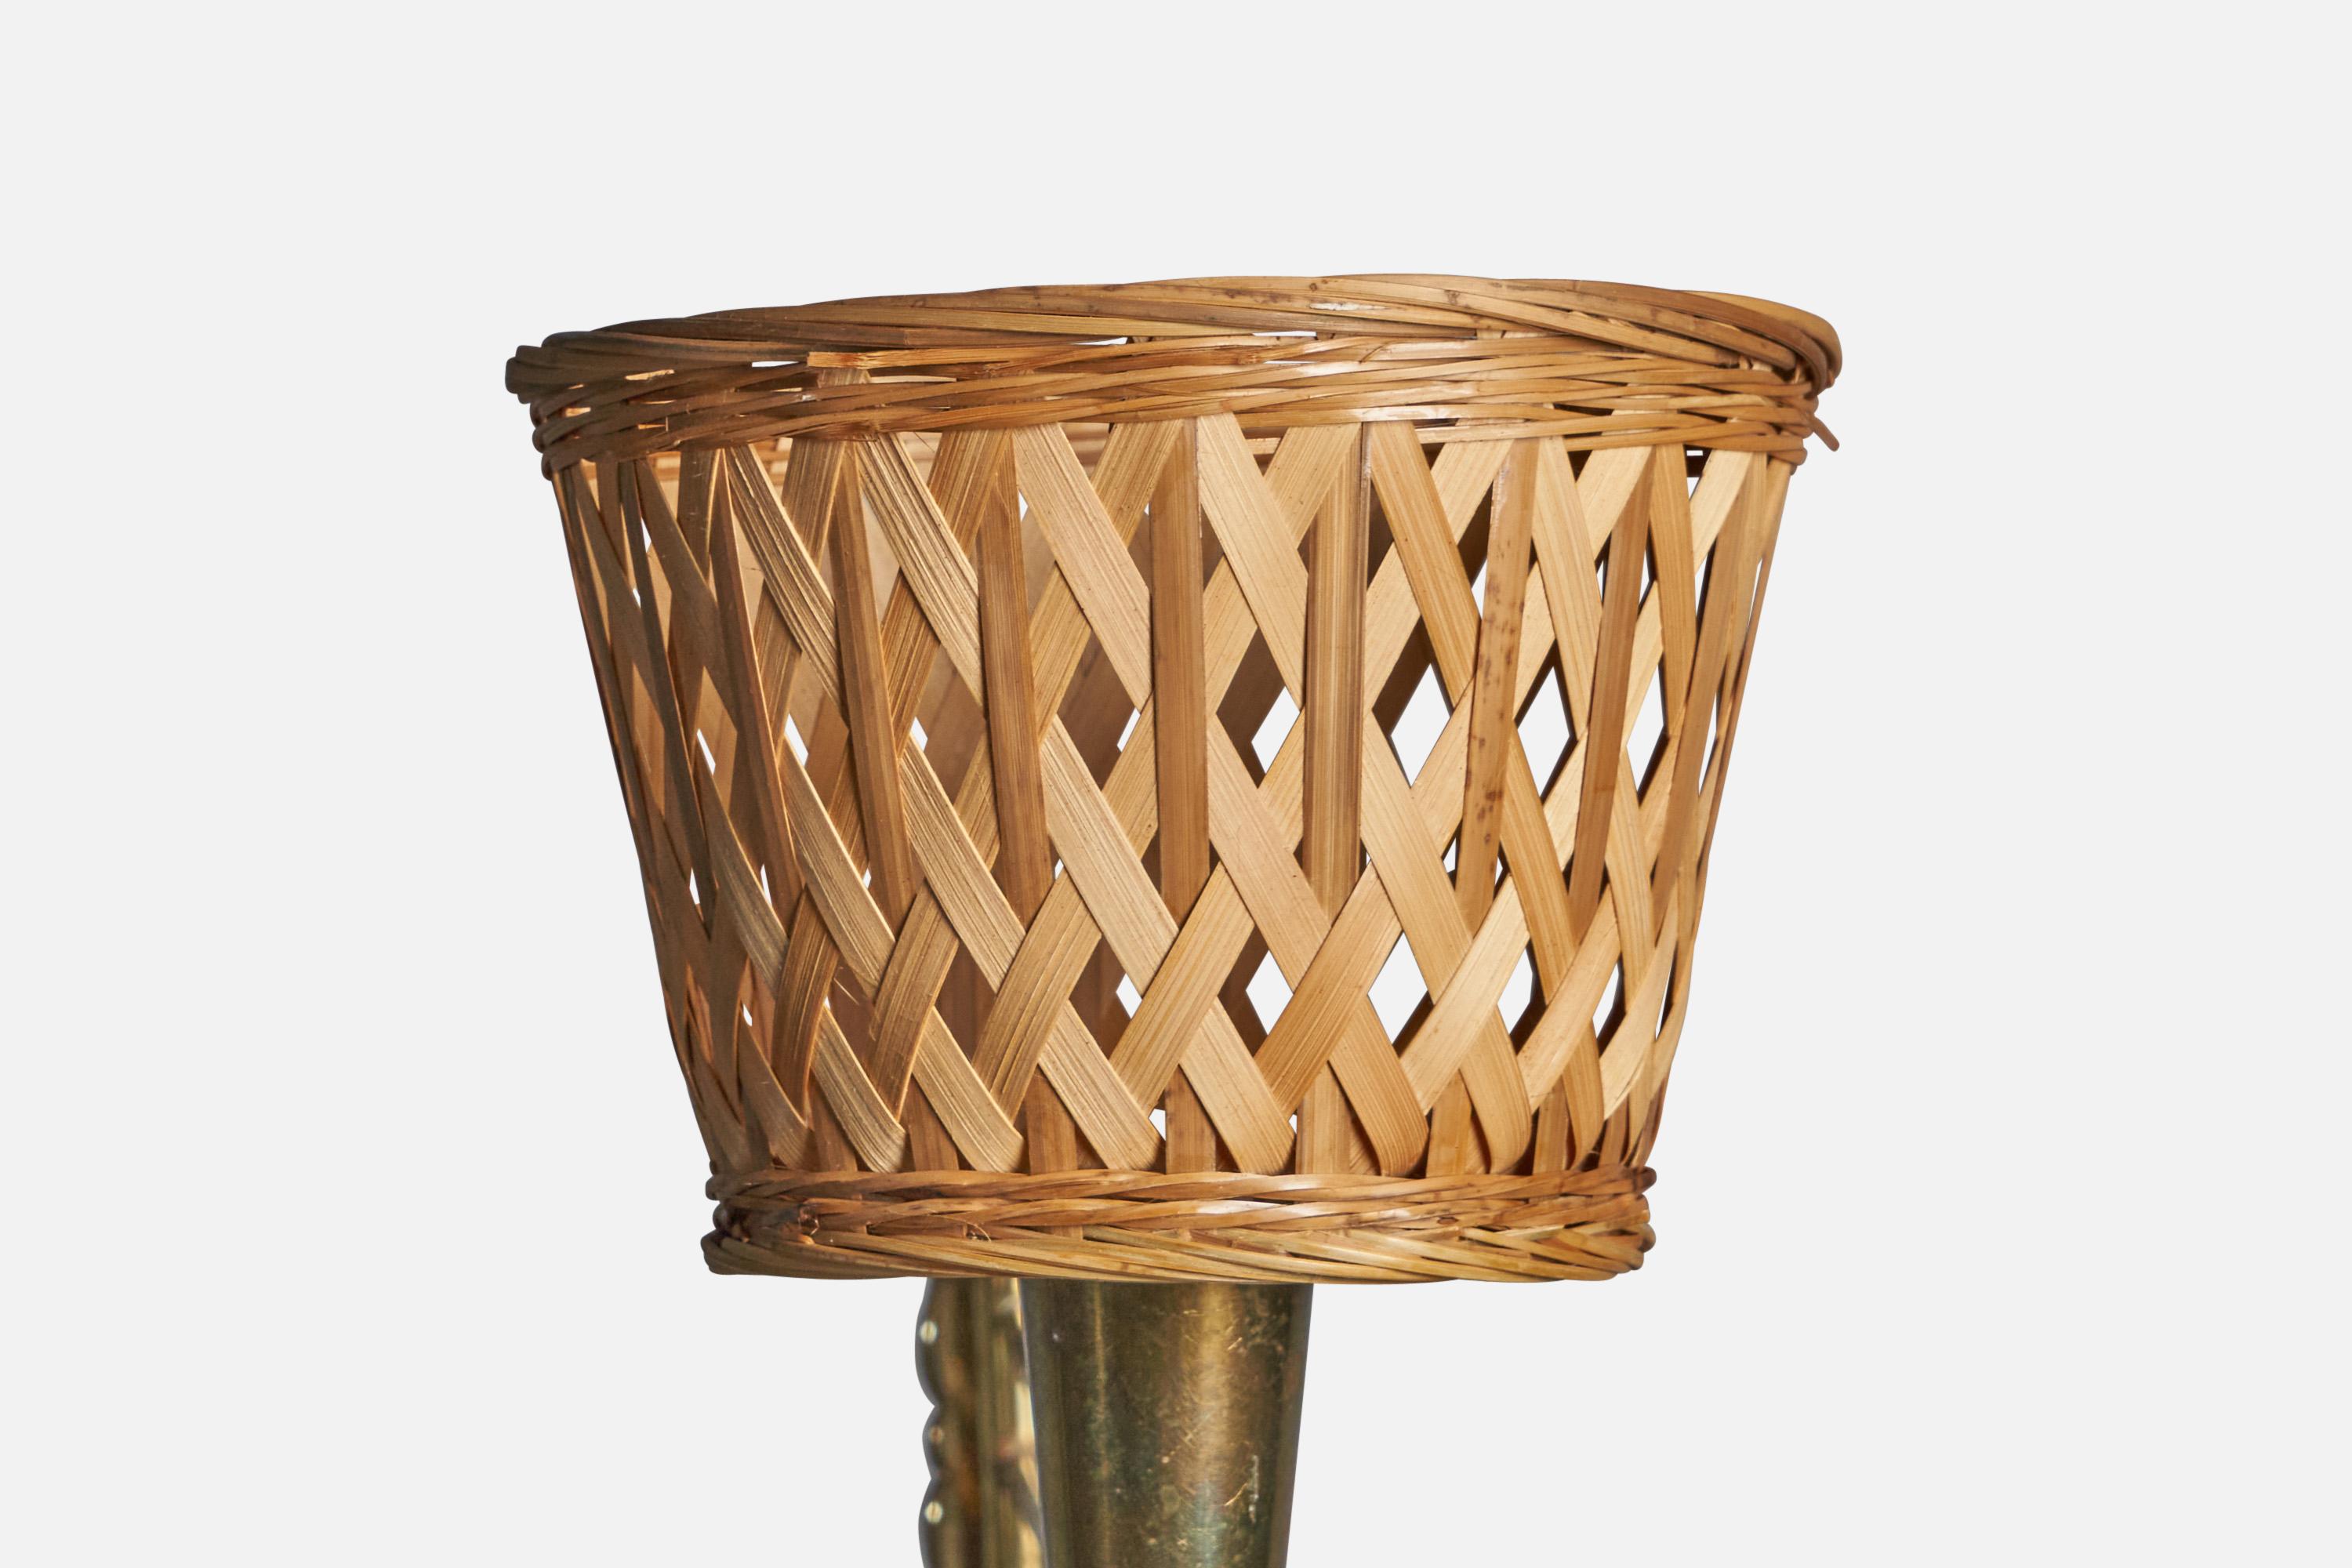 A brass and rattan wall light, designed and produced in Denmark, c. 1940s.

Overall Dimensions (inches): 9.4